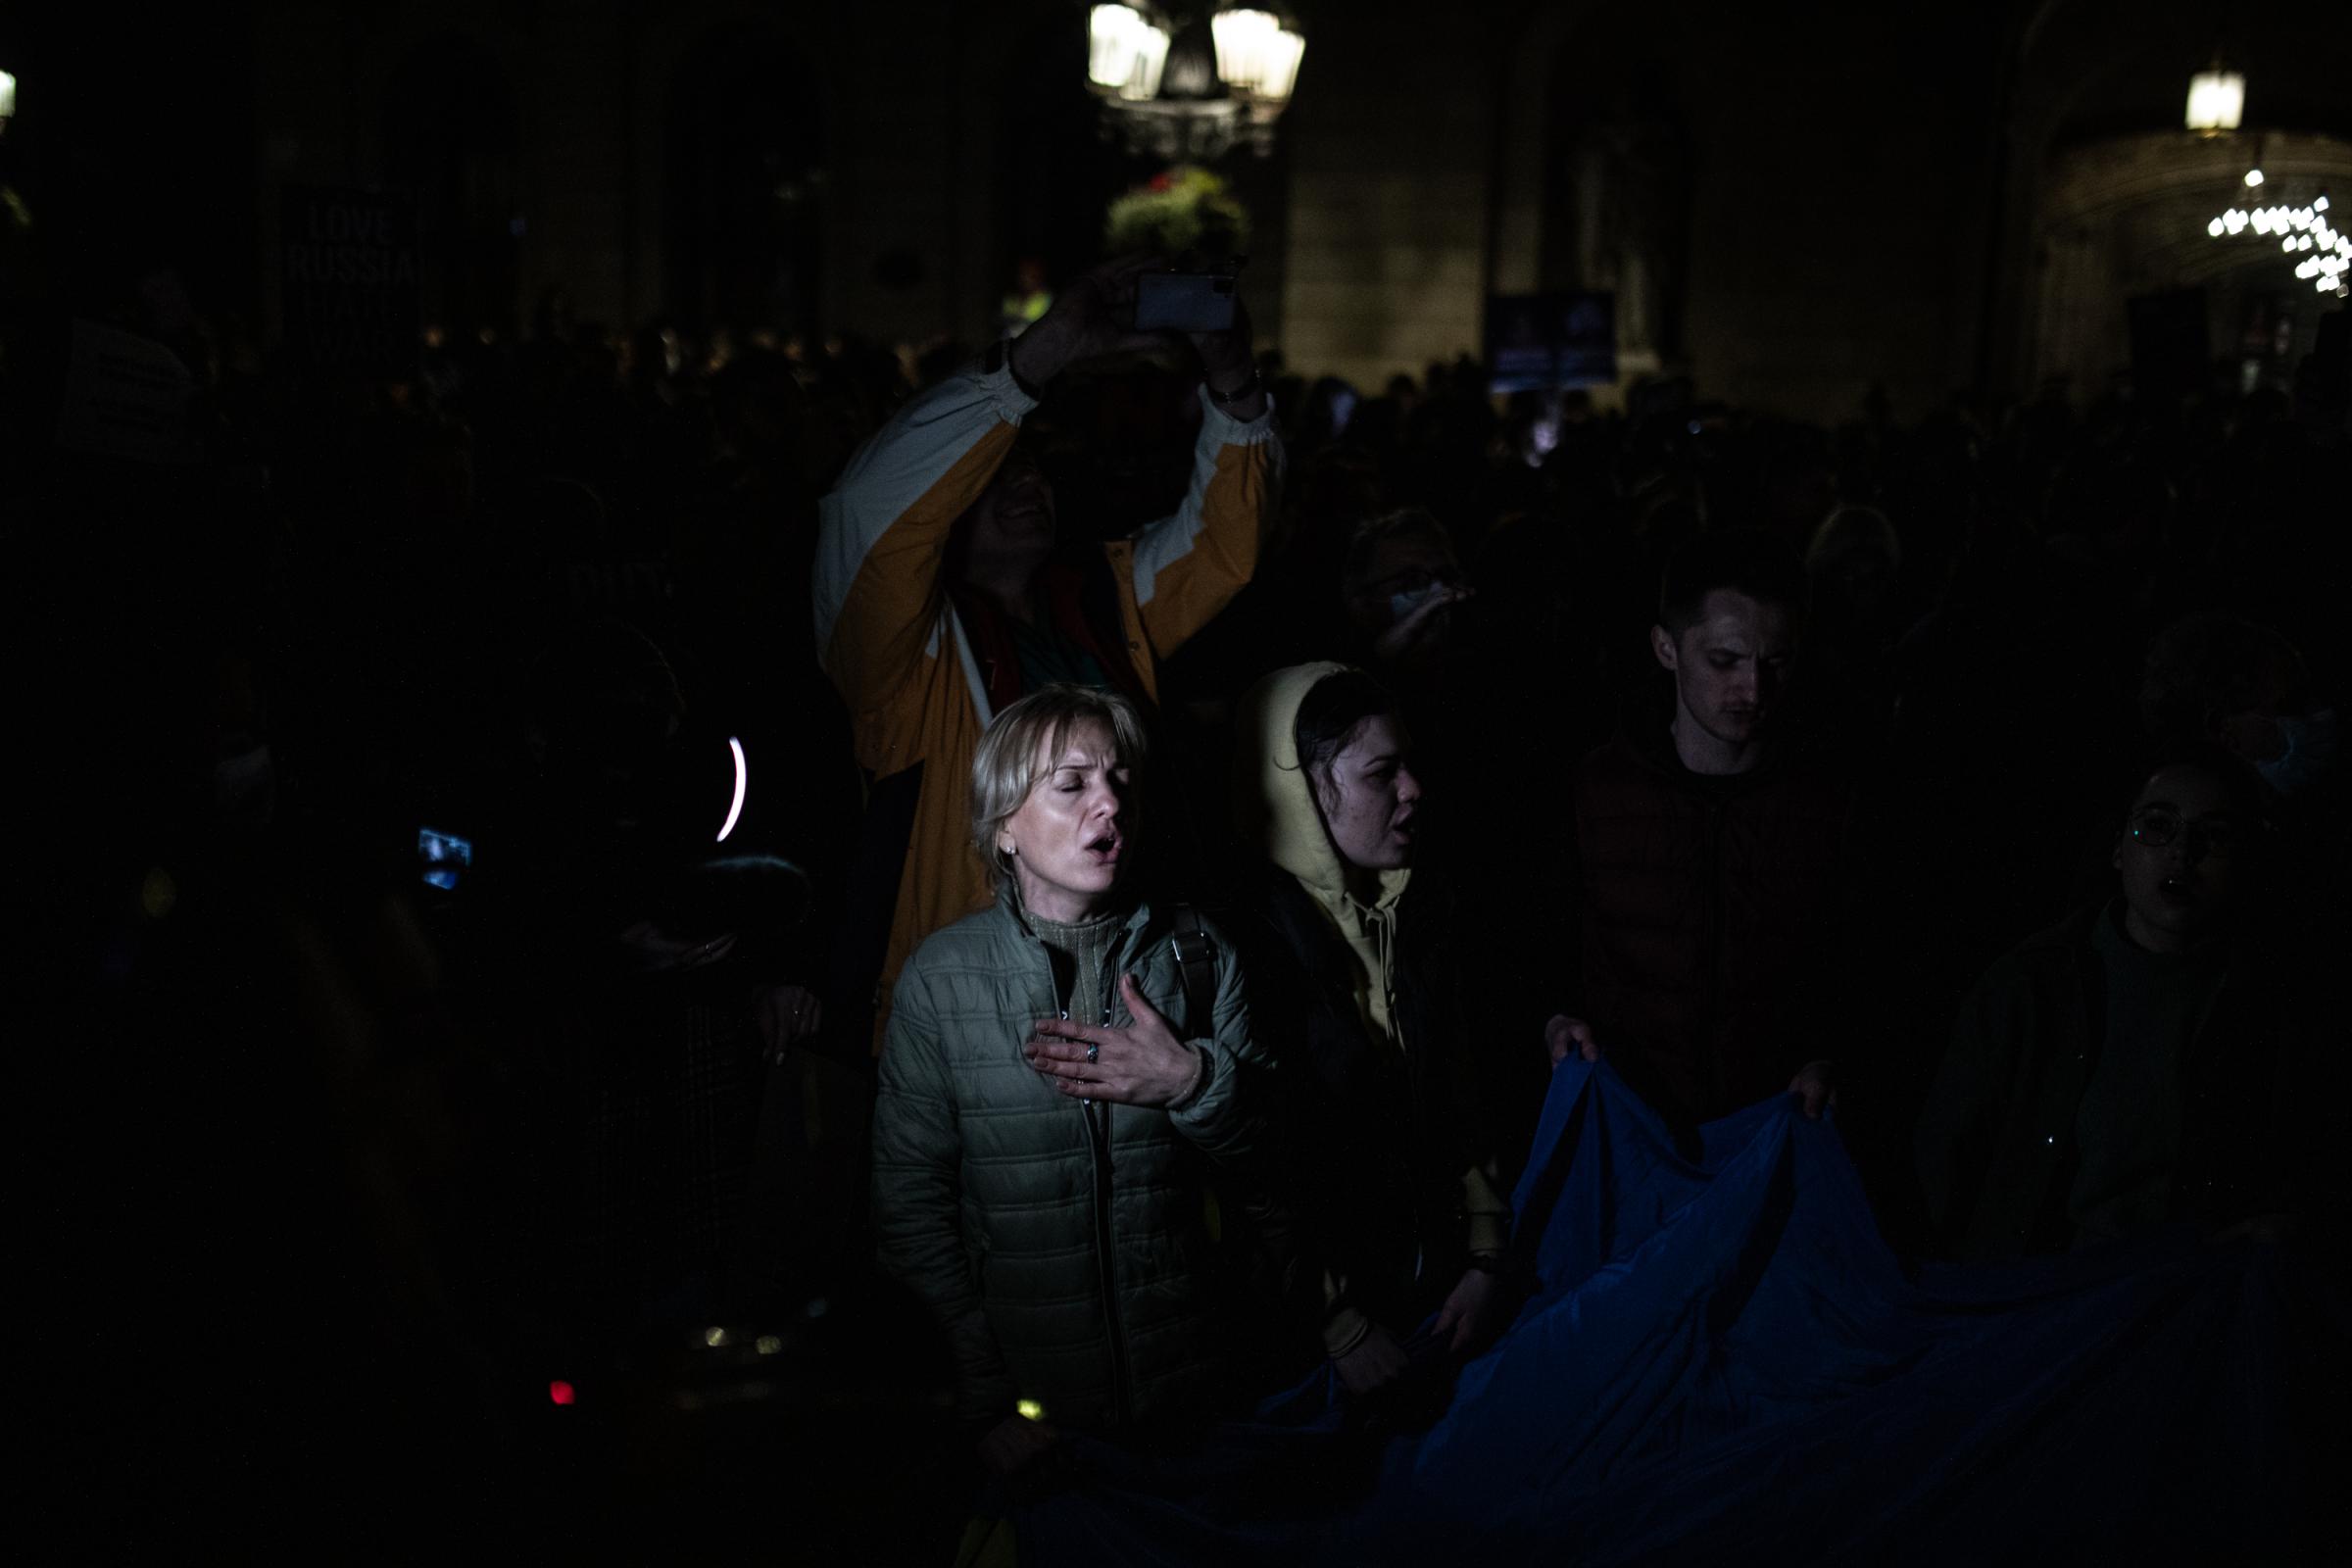 Protestors In Spain Rally For Ukraine After Russian Invasion - BARCELONA, SPAIN - FEBRUARY 24: People protest and sing...